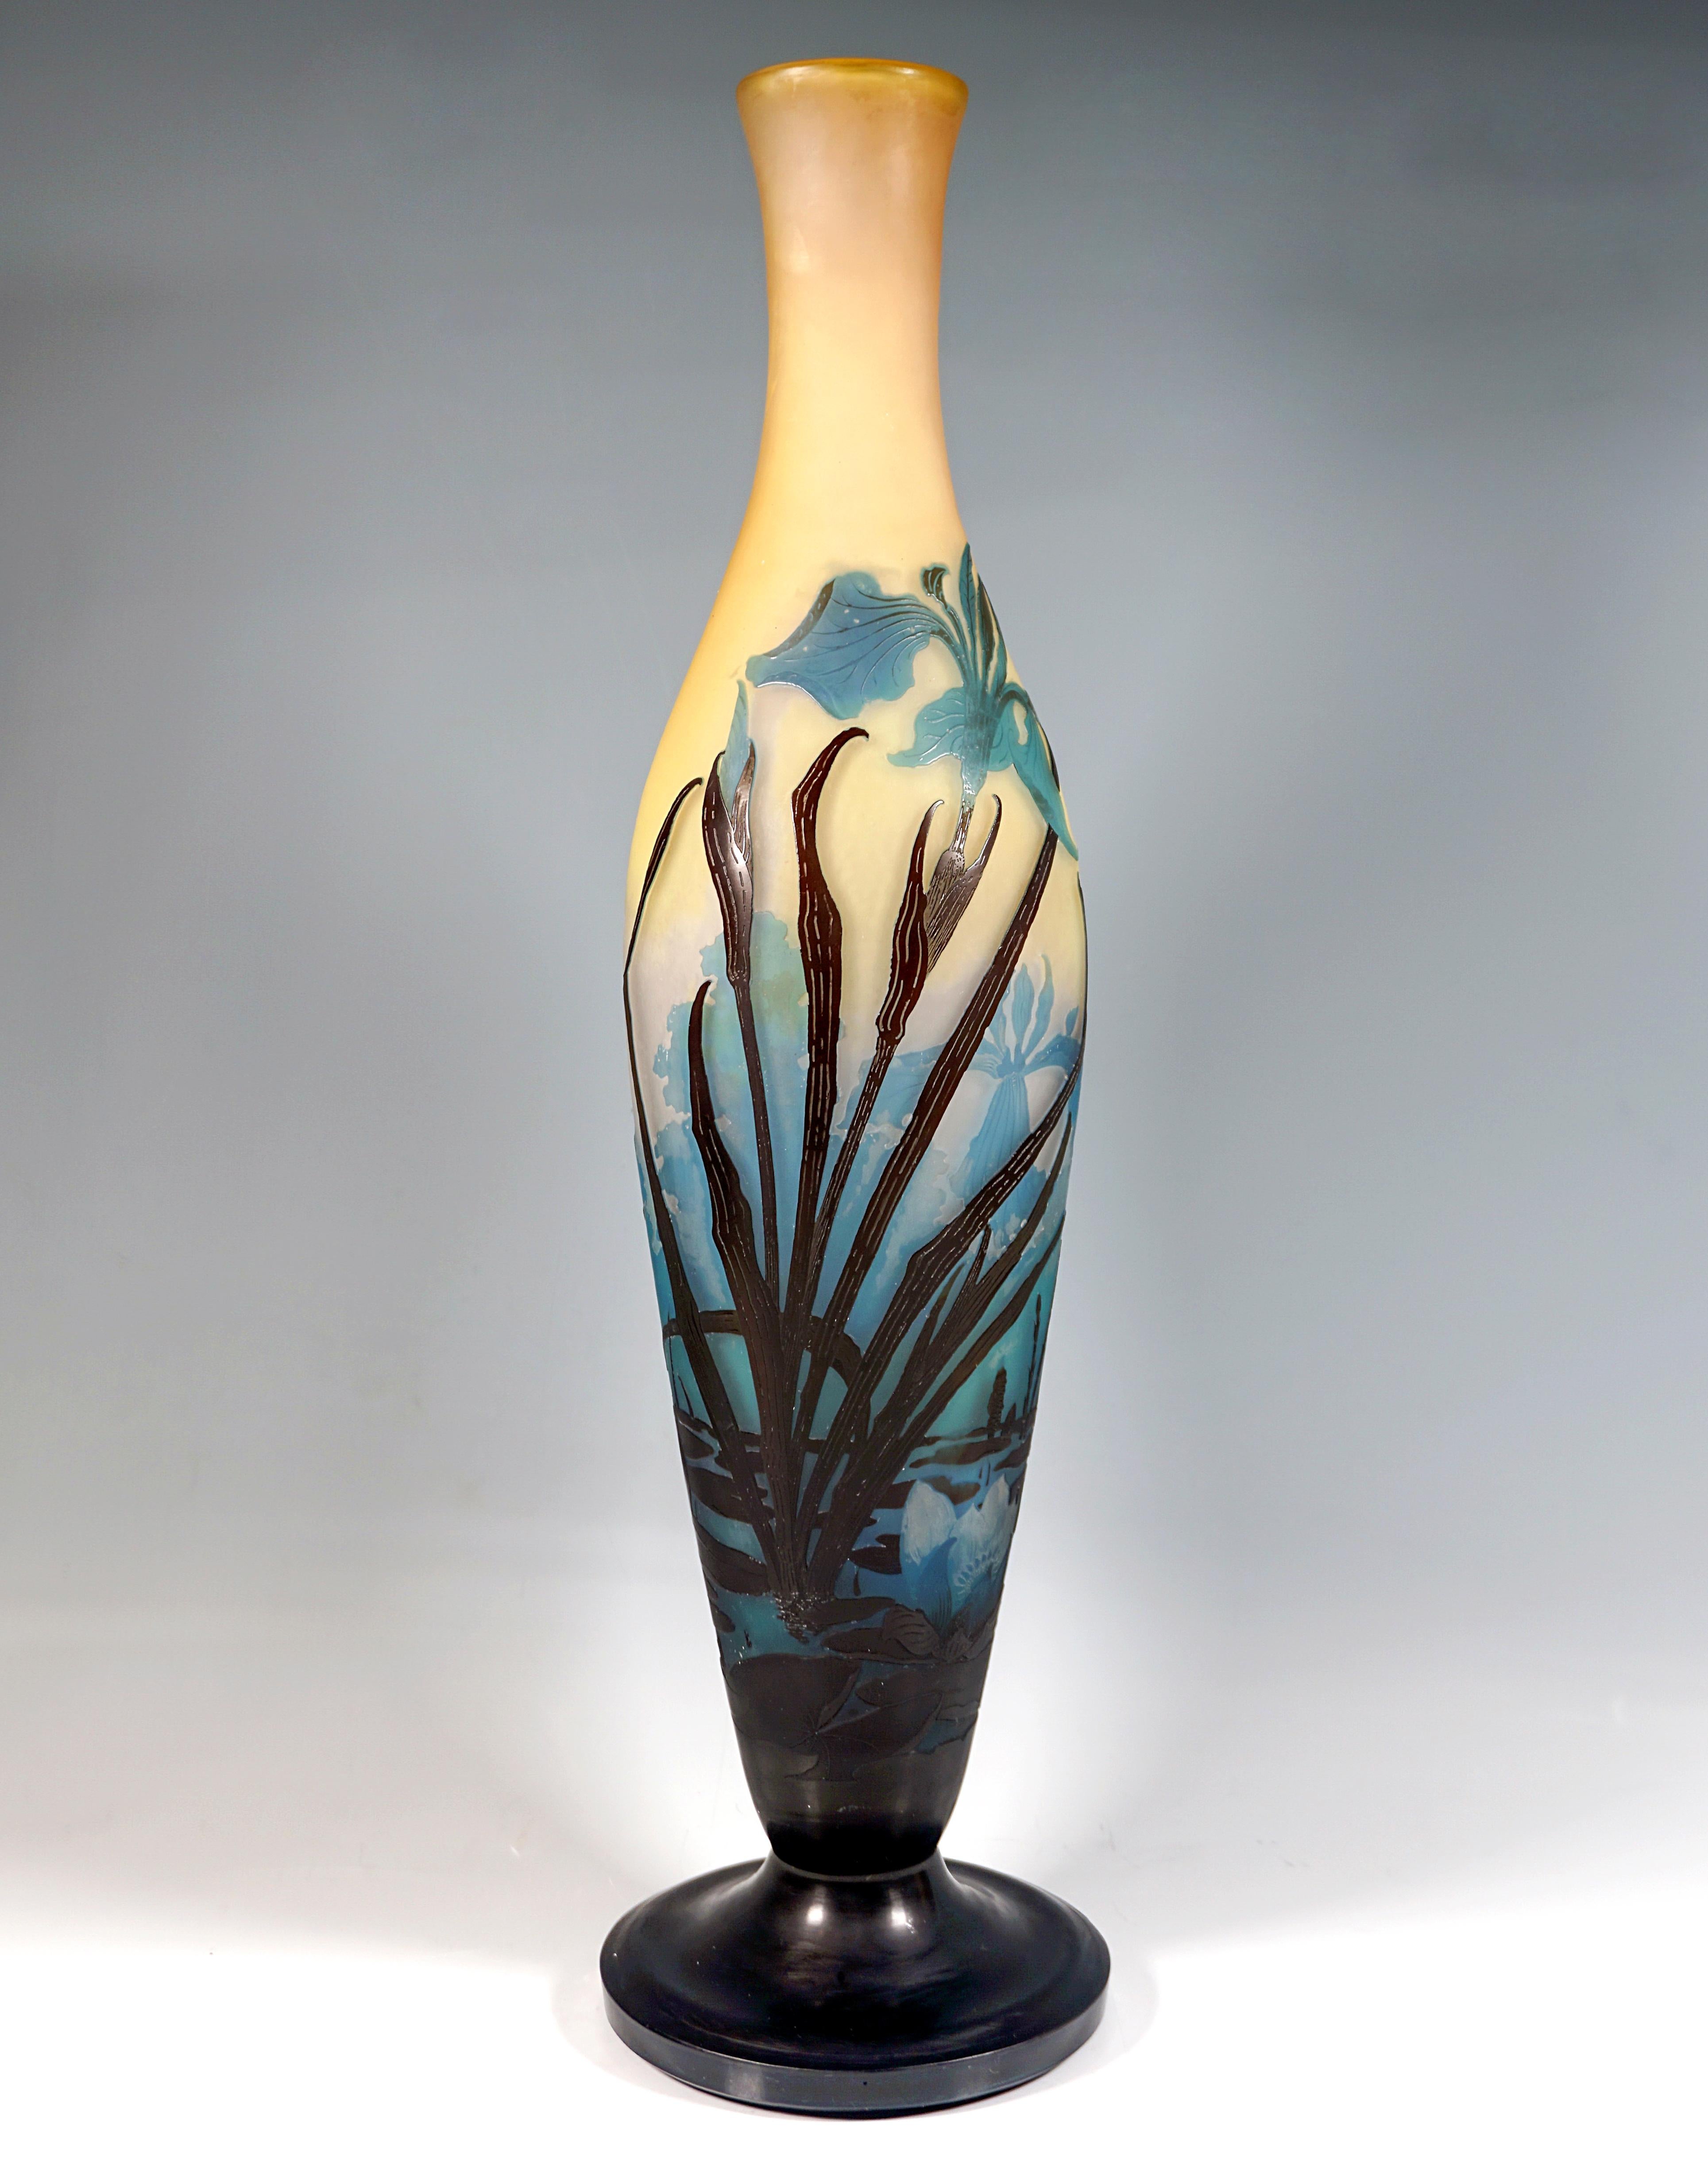 Slender baluster-shaped vase body on a separate base, widening conically towards the top and then narrowing again to form a slender neck with a flared mouth rim, colorless glass with yellow-orange color powder inclusions in the upper area, overlays